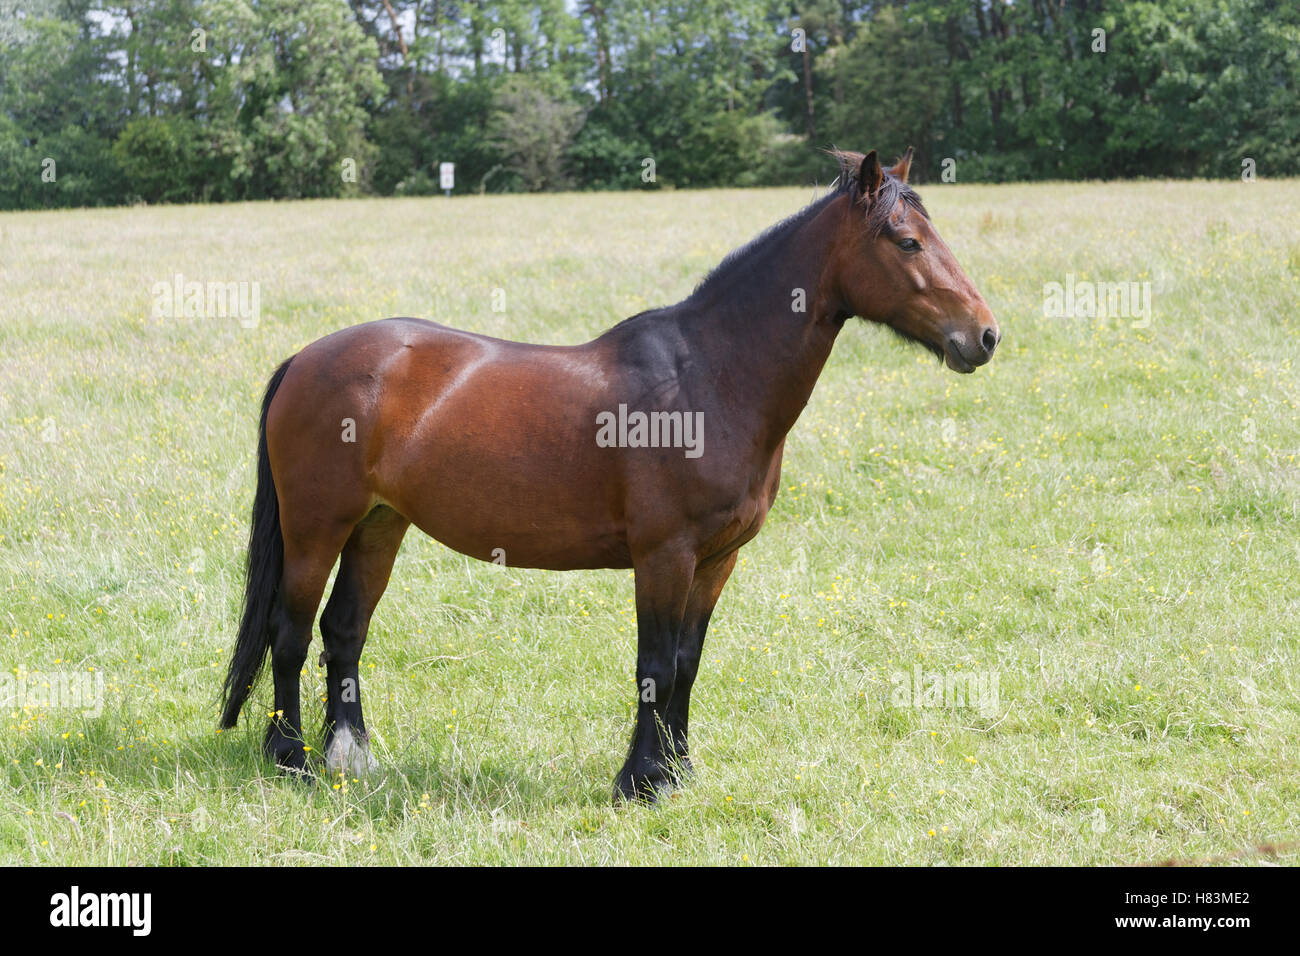 Horse in a field chestnut Stock Photo